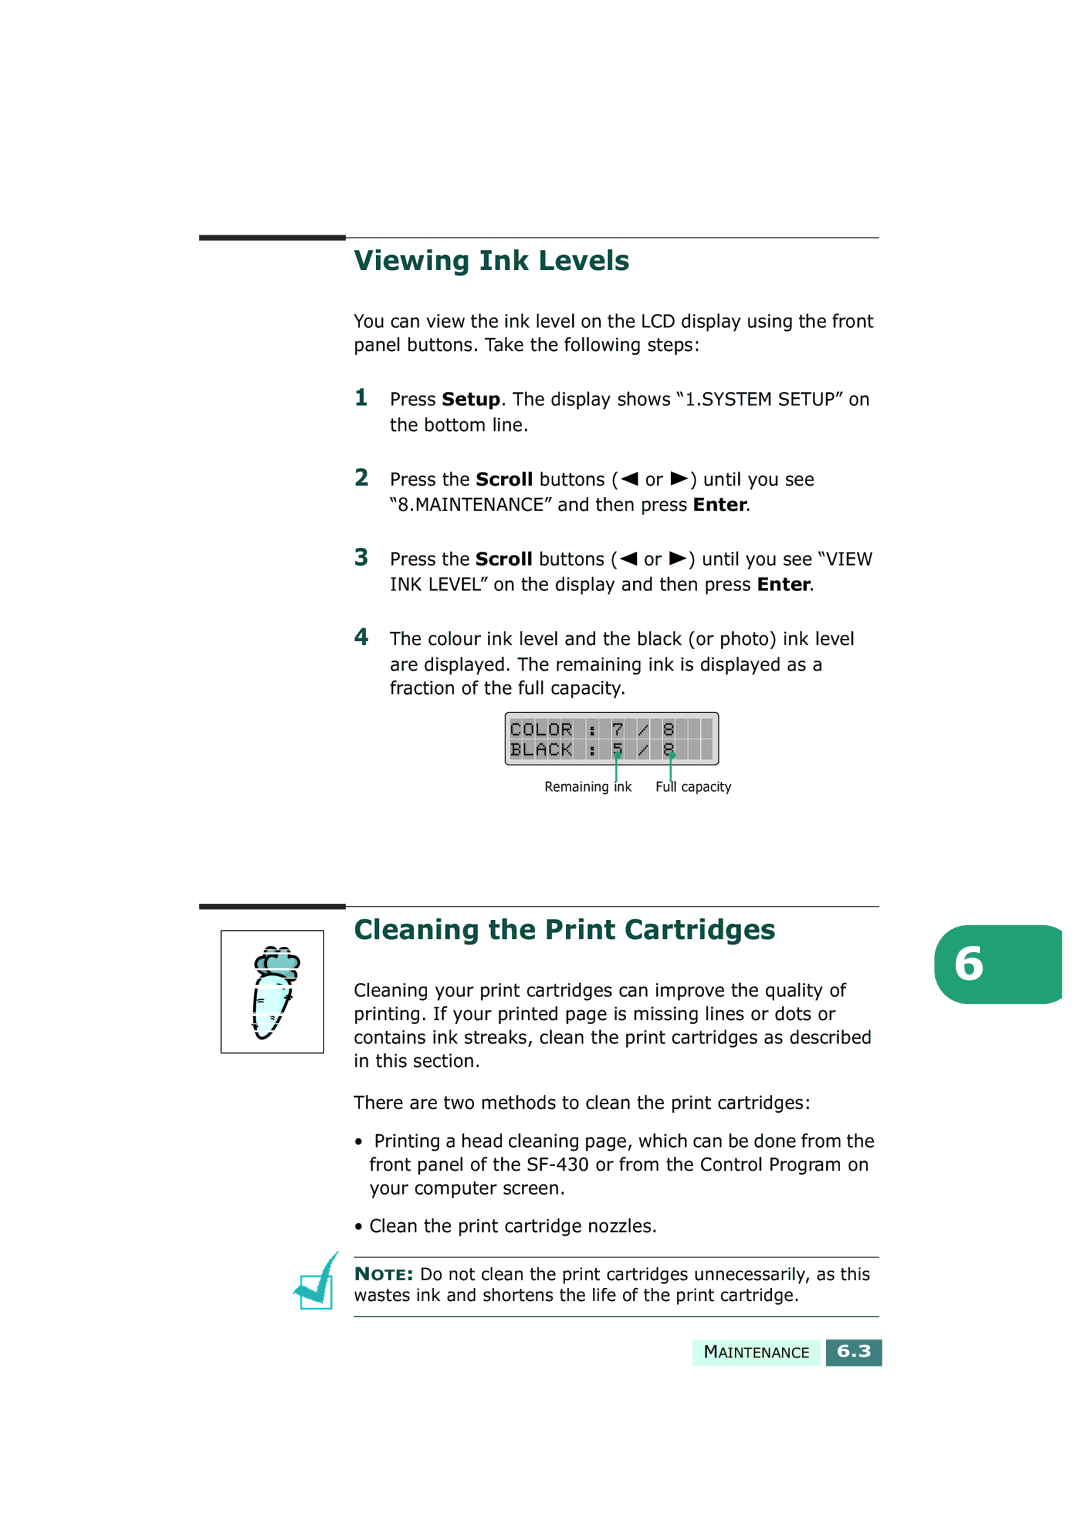 Samsung SF-430 manual Viewing Ink Levels, Cleaning the Print Cartridges 